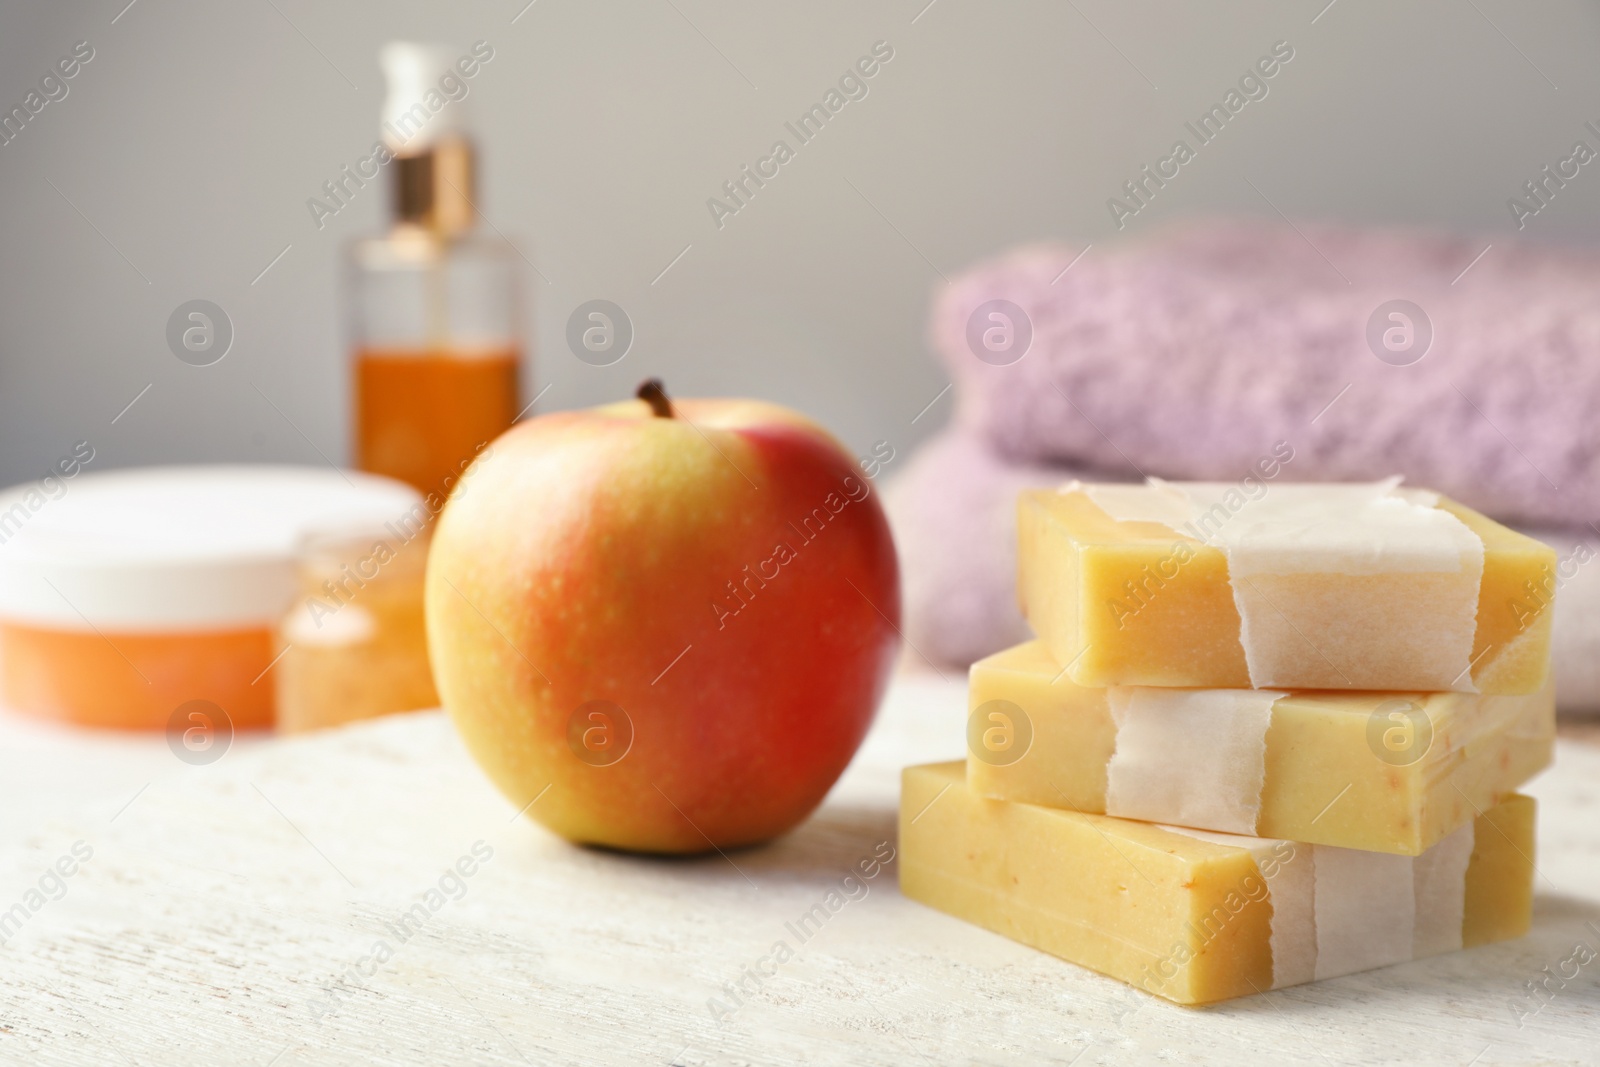 Photo of Handmade soap bars and apple on table